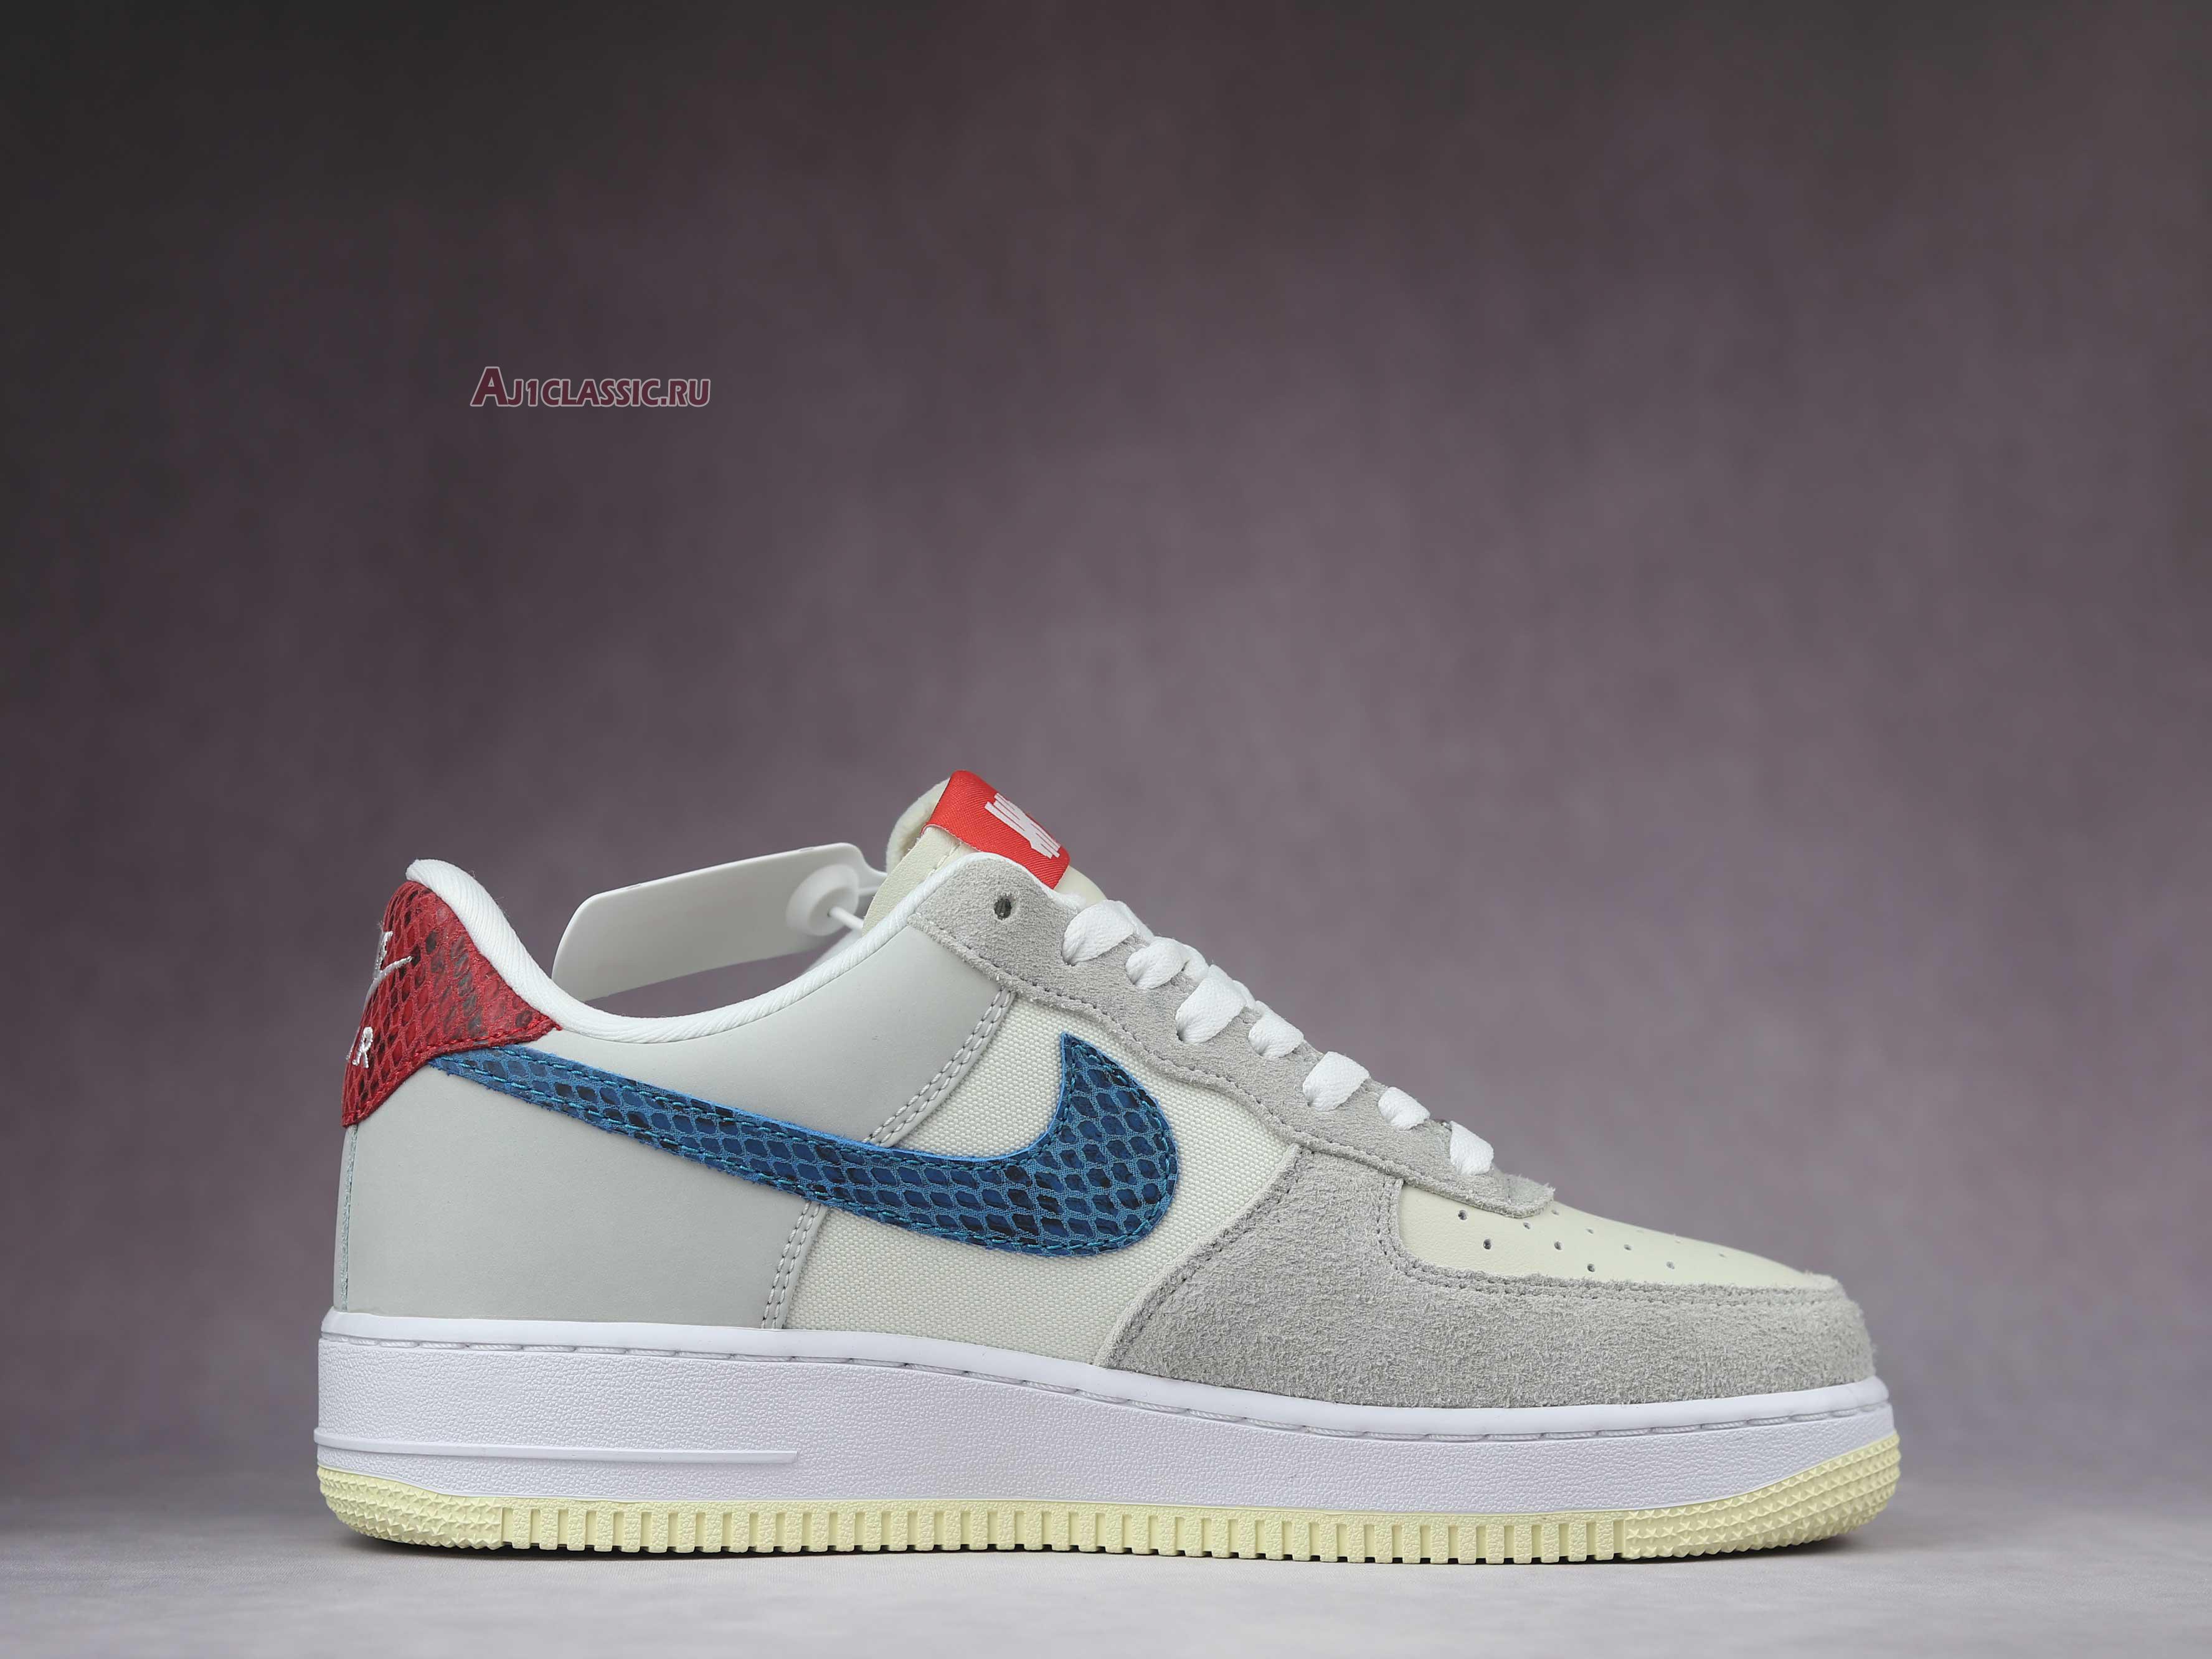 Undefeated x Air Force 1 Low "5 On It" DM8461-001